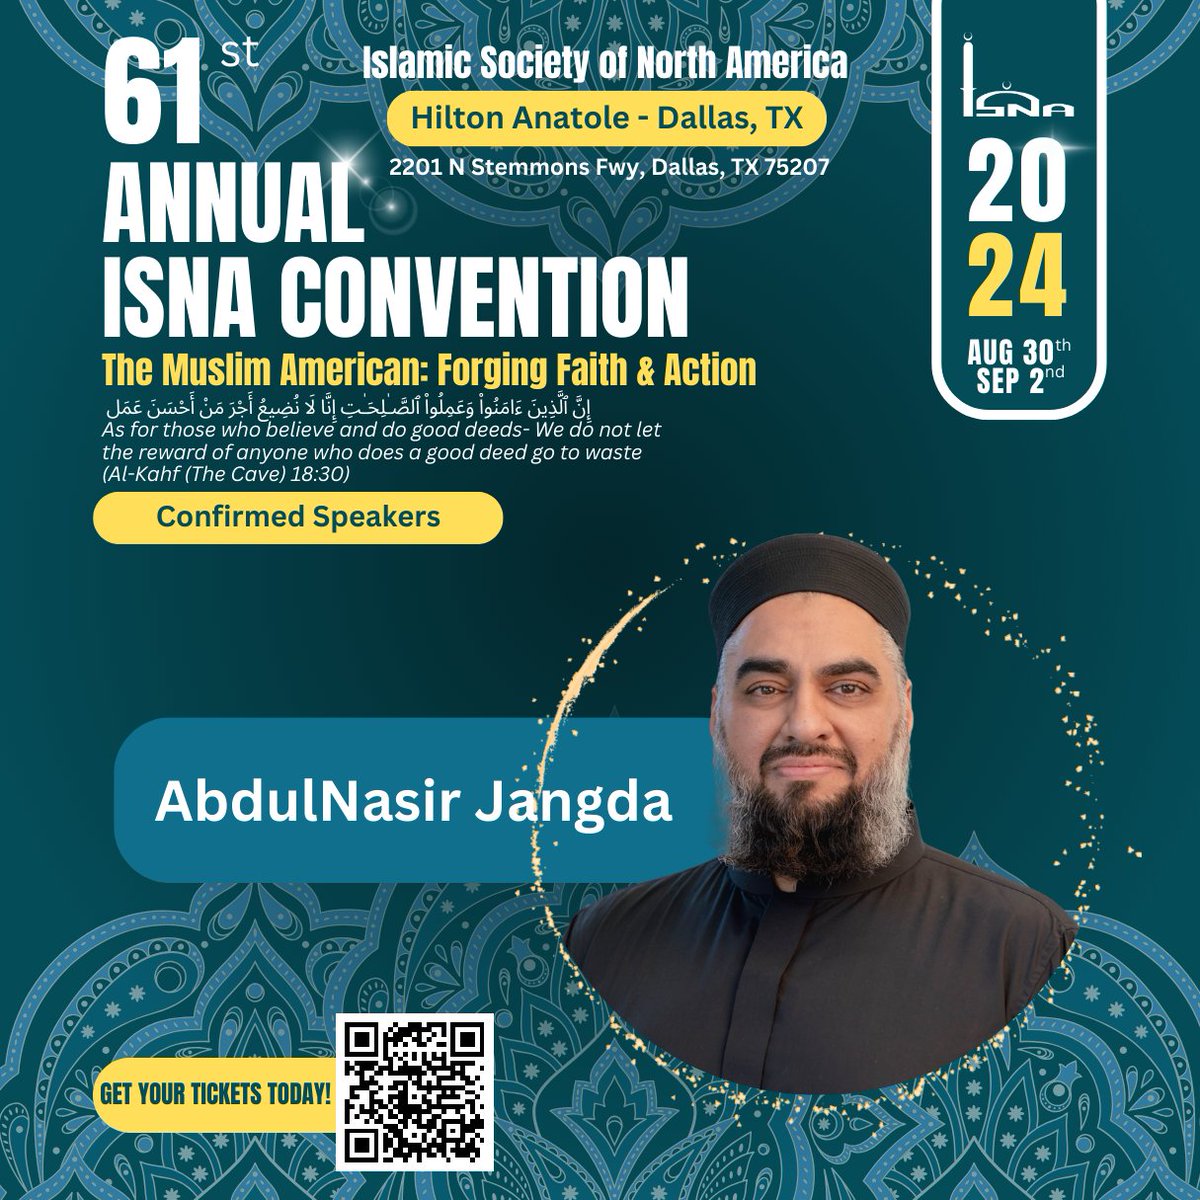 AbdulNasir Jangda is a confirmed speaker for ISNA's 61st Annual Convention in Dallas, TX this year! Get your tickets at isna.net/convention/ #ISNA61 #ISNAconvention #dallas